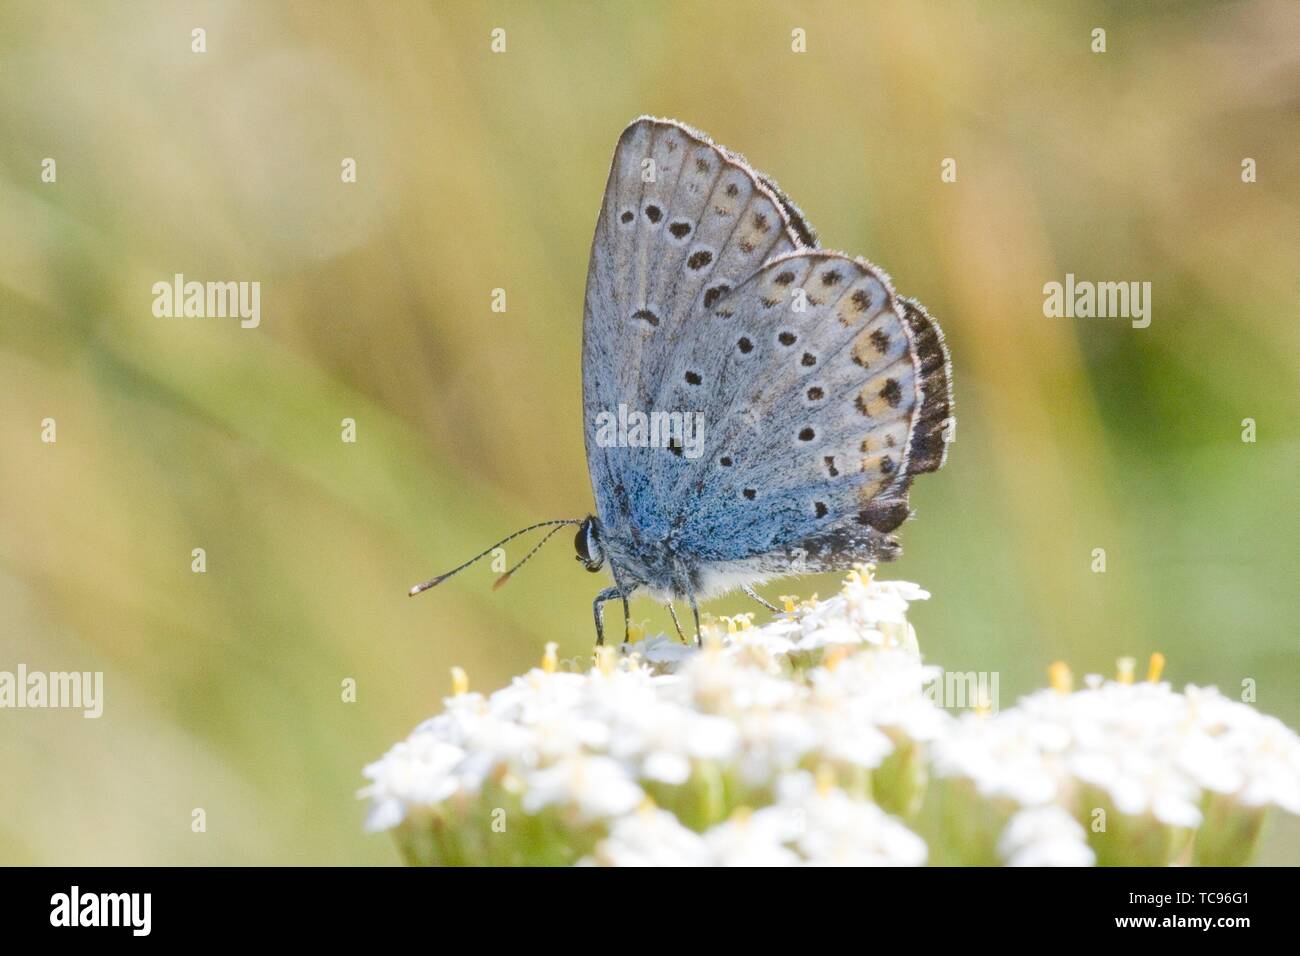 Idas Blue, Plebejus idas. Small blue butterfly that is found in nutrient poor habitats and sandy grasslands. Easily cofused with Reverdin's Blue and Stock Photo